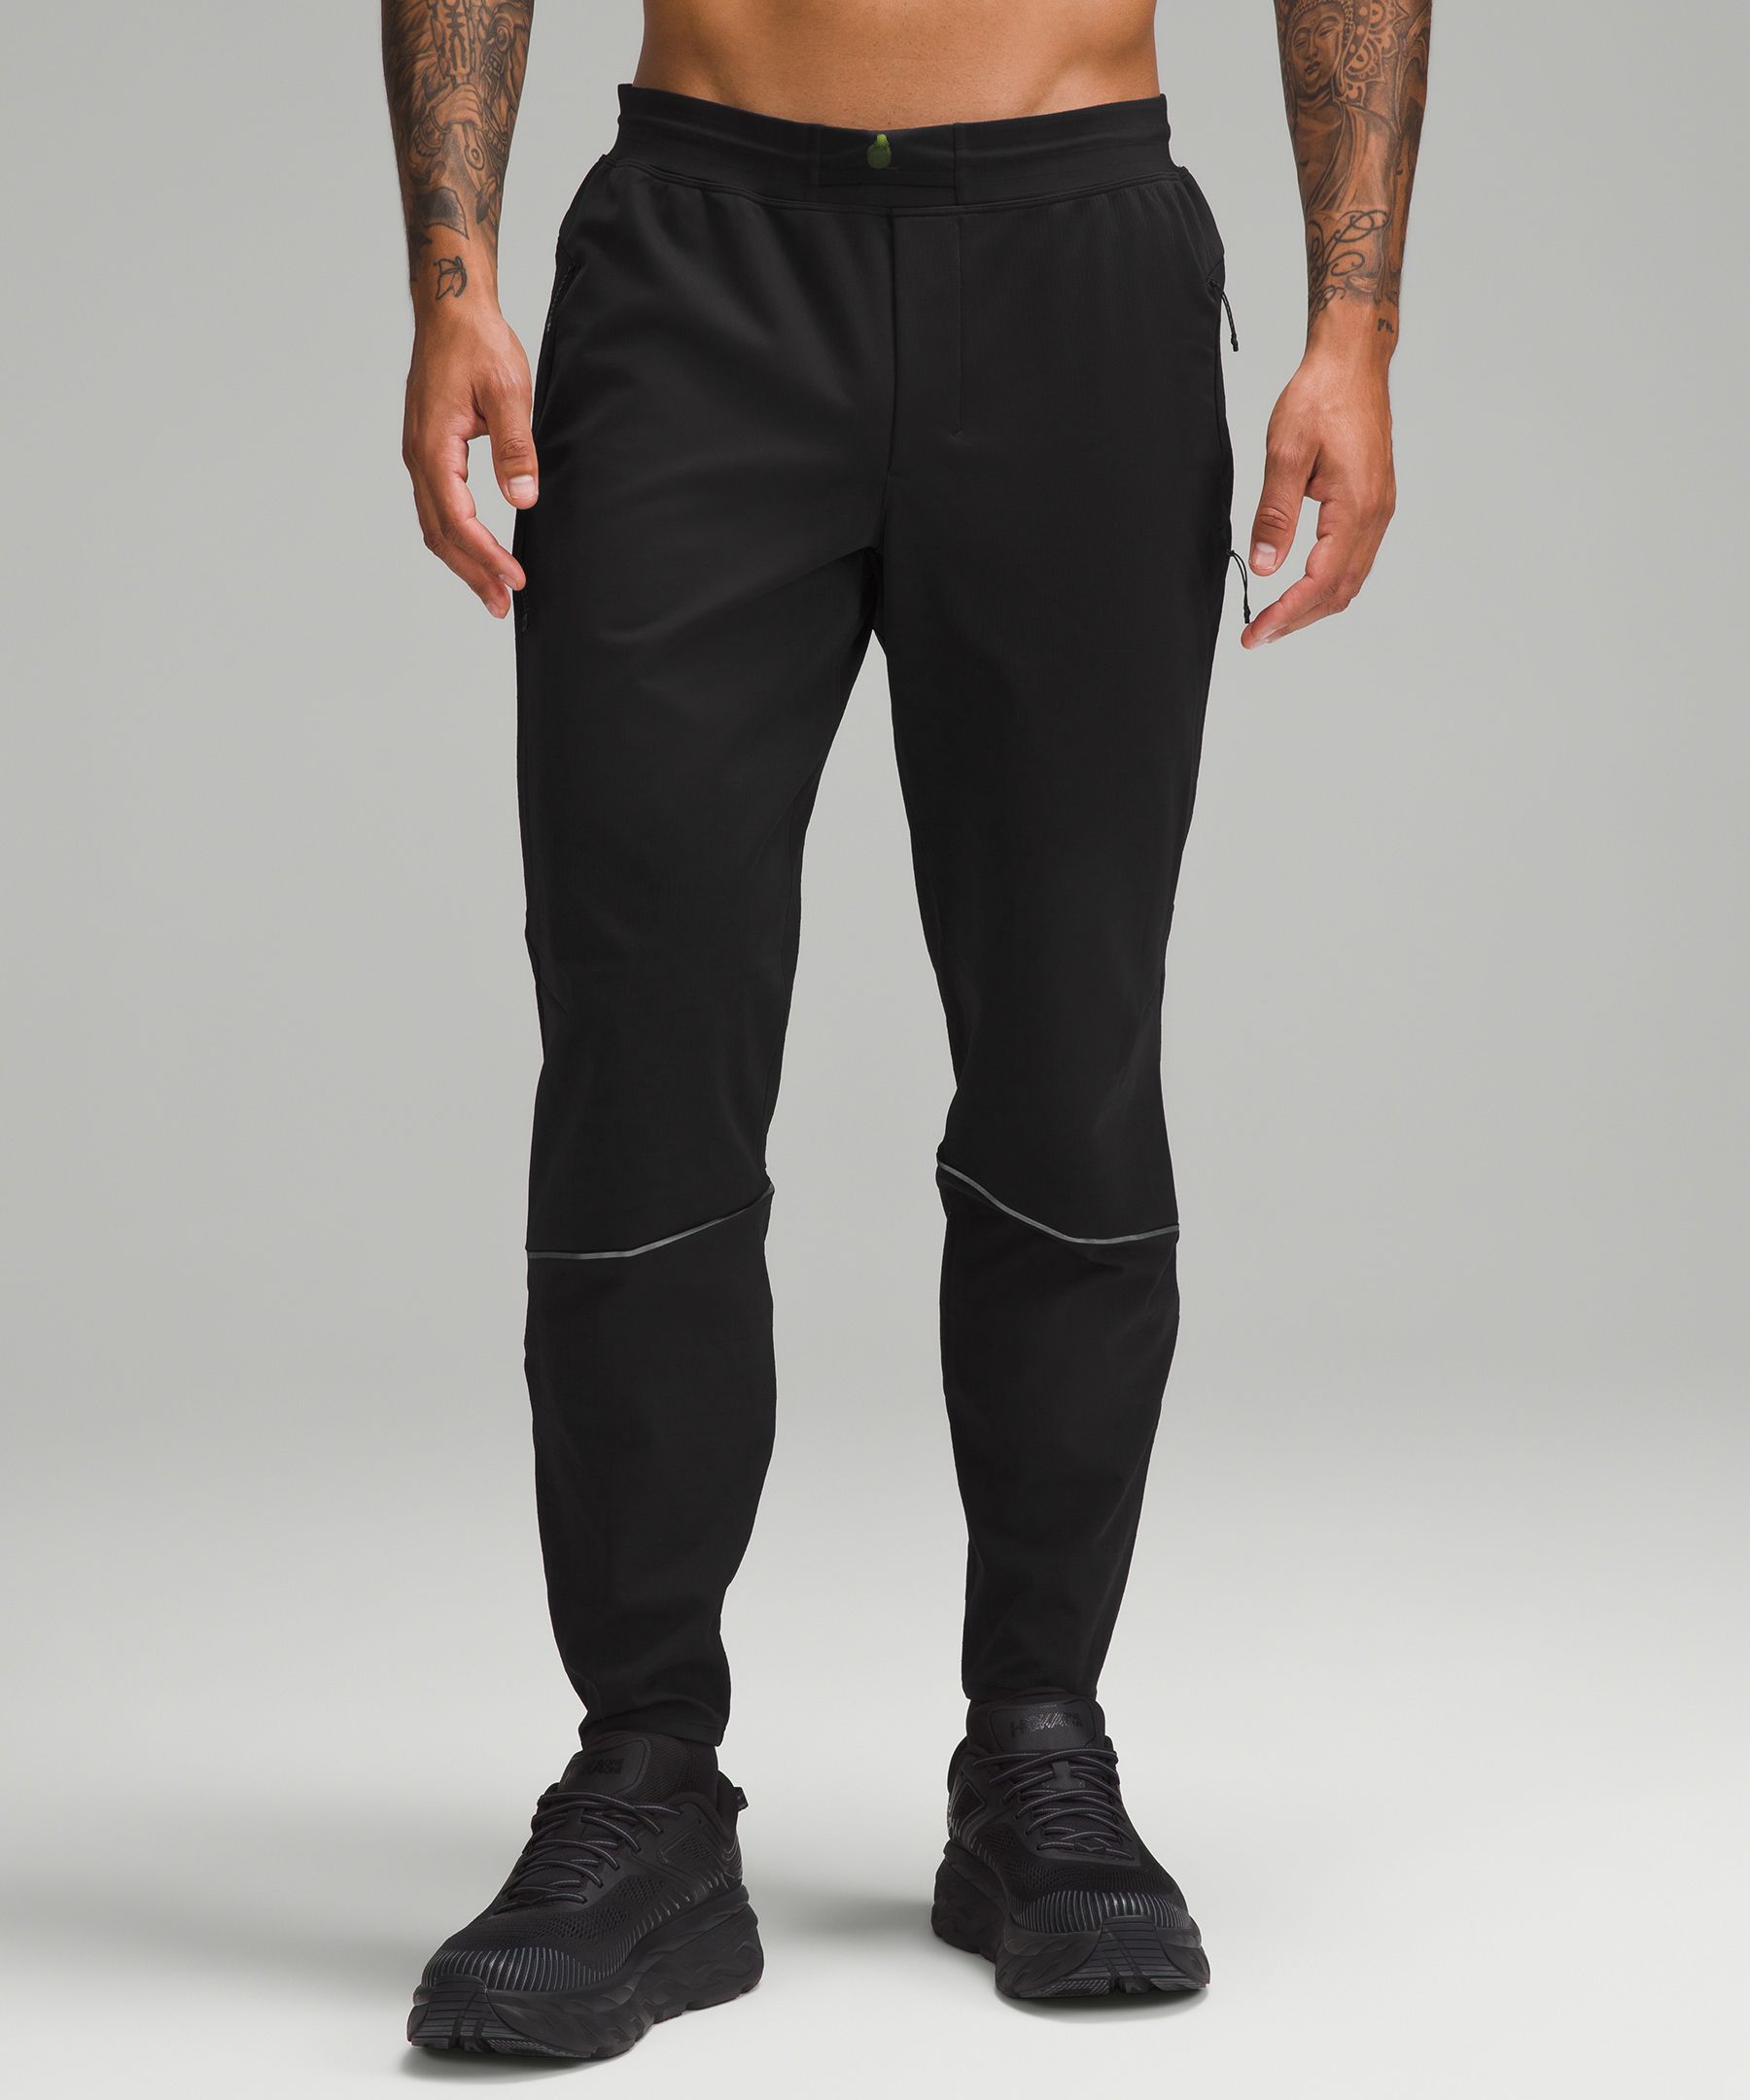 Fast and Free Cold Weather Running Pant 28, Men's Joggers